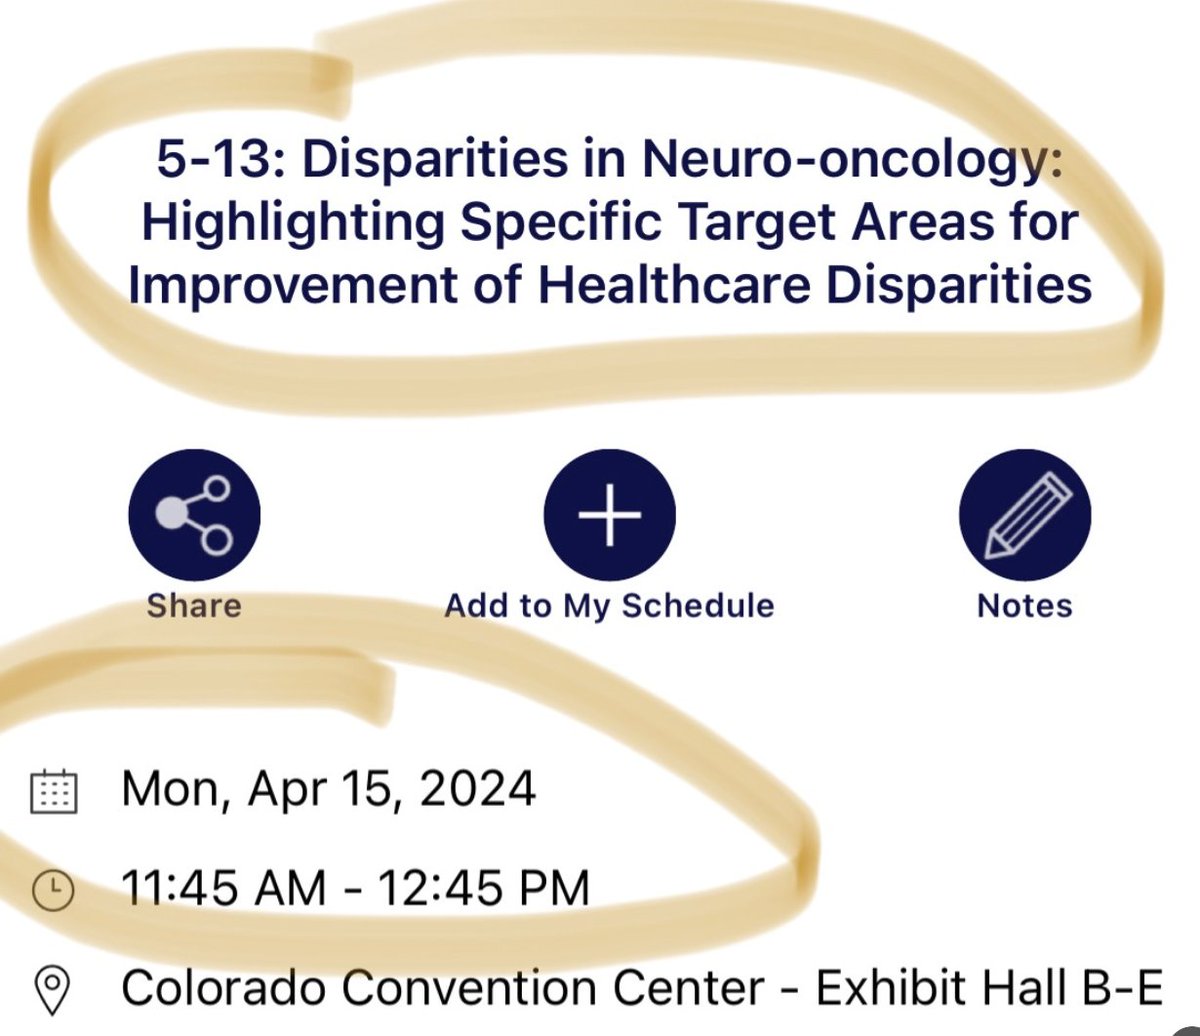 Excited to head to Denver on Sunday for the annual Neurology meeting #AANAM. Please stop by our poster, highlighting important disparities in neuro-oncology and chat with me and the legendary @JoshuaBudhu! 🧠Don't be shy, come by and say hi! 🥳